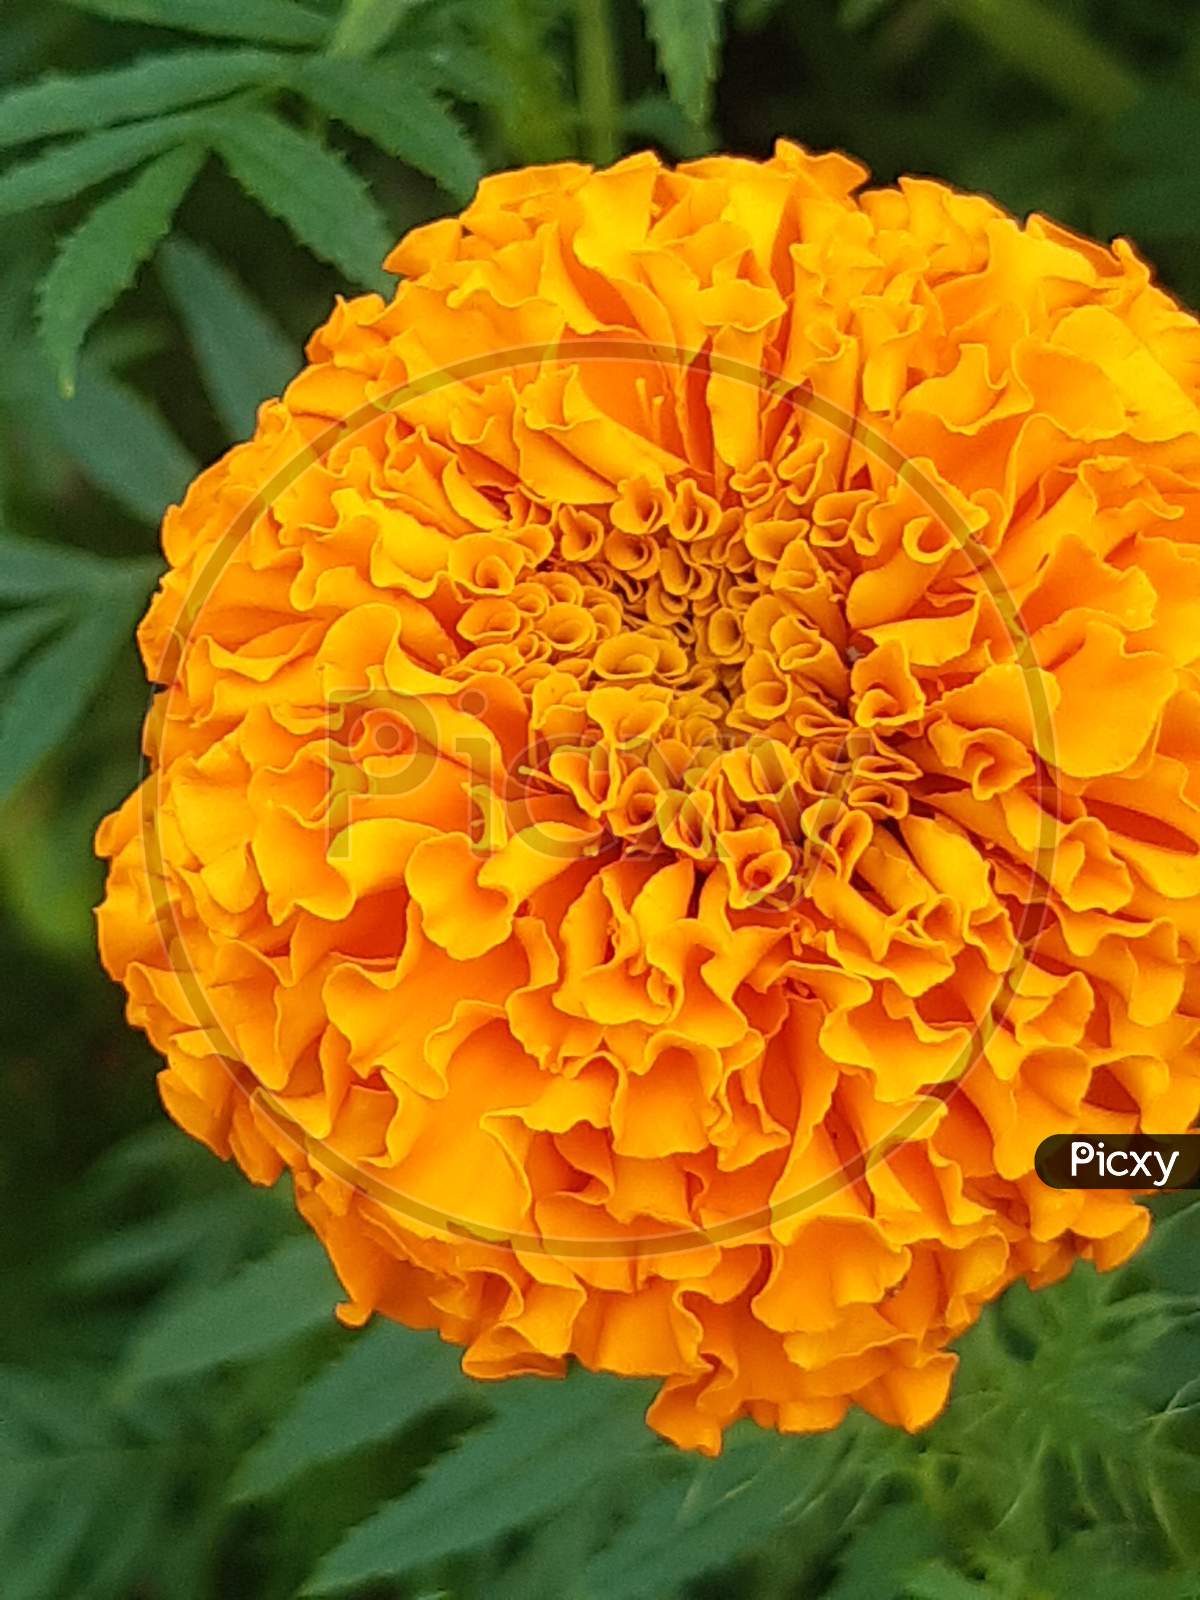 Yellow Marigold Flower On The Green Tree And Green Background And This Is The Flower Garden.